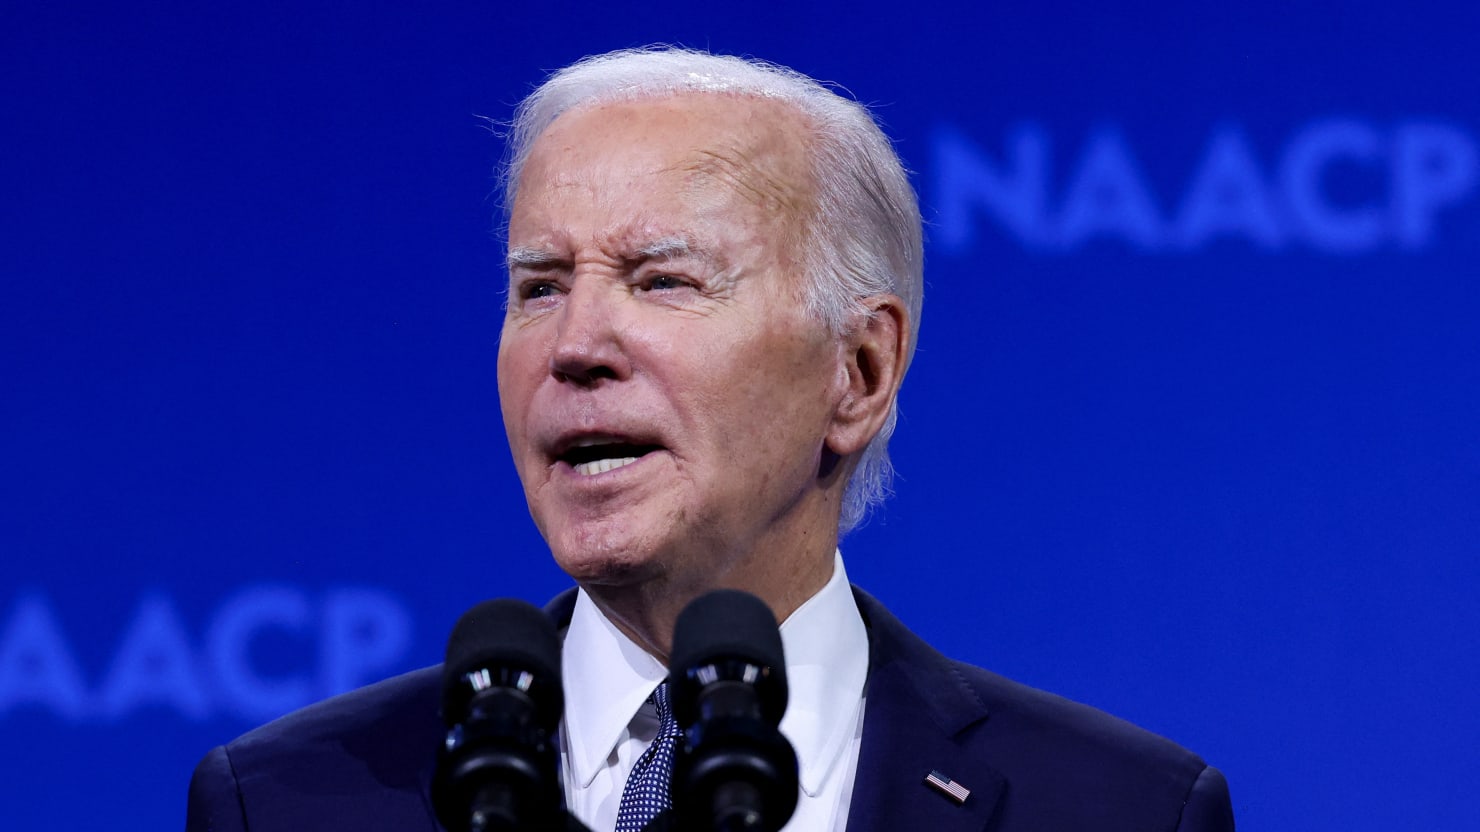 Biden Claps Back at Trump Over ‘Black Jobs’ Comment in NAACP Speech